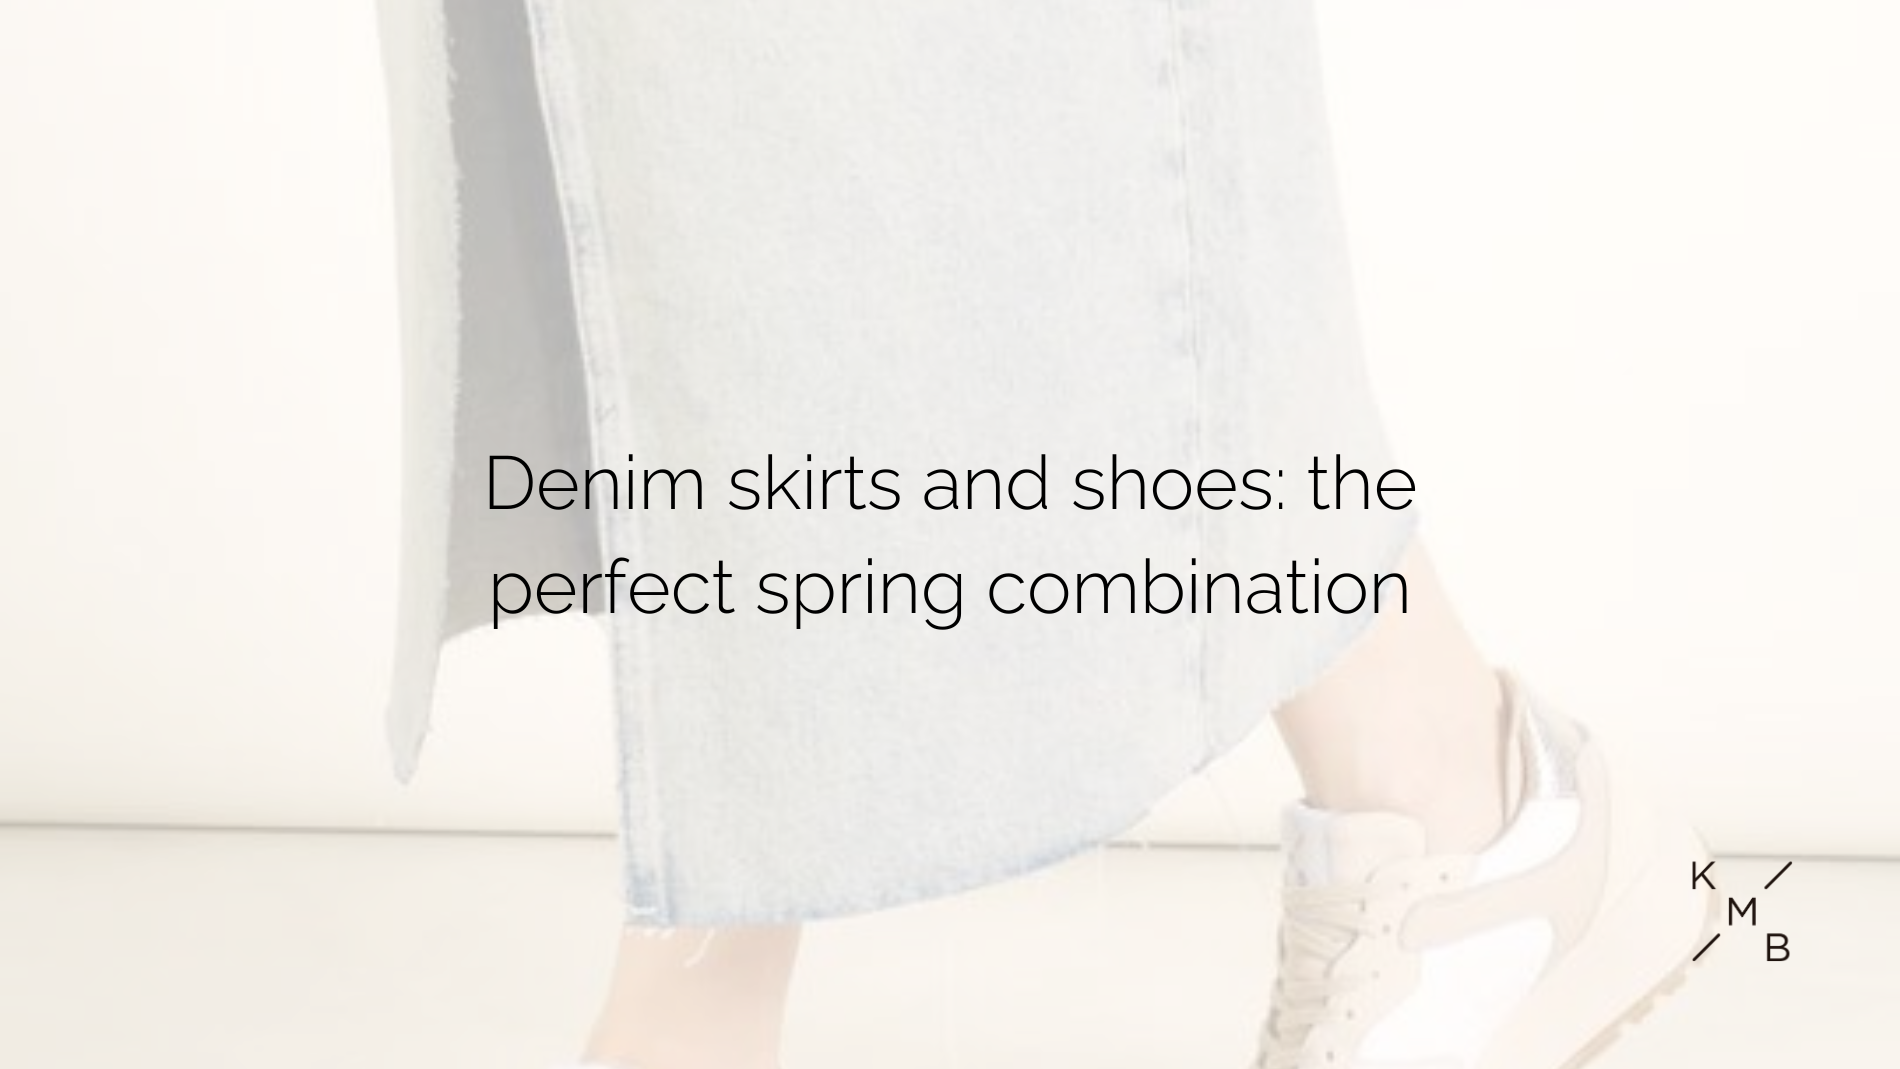 Denim skirts and shoes: the perfect spring combination